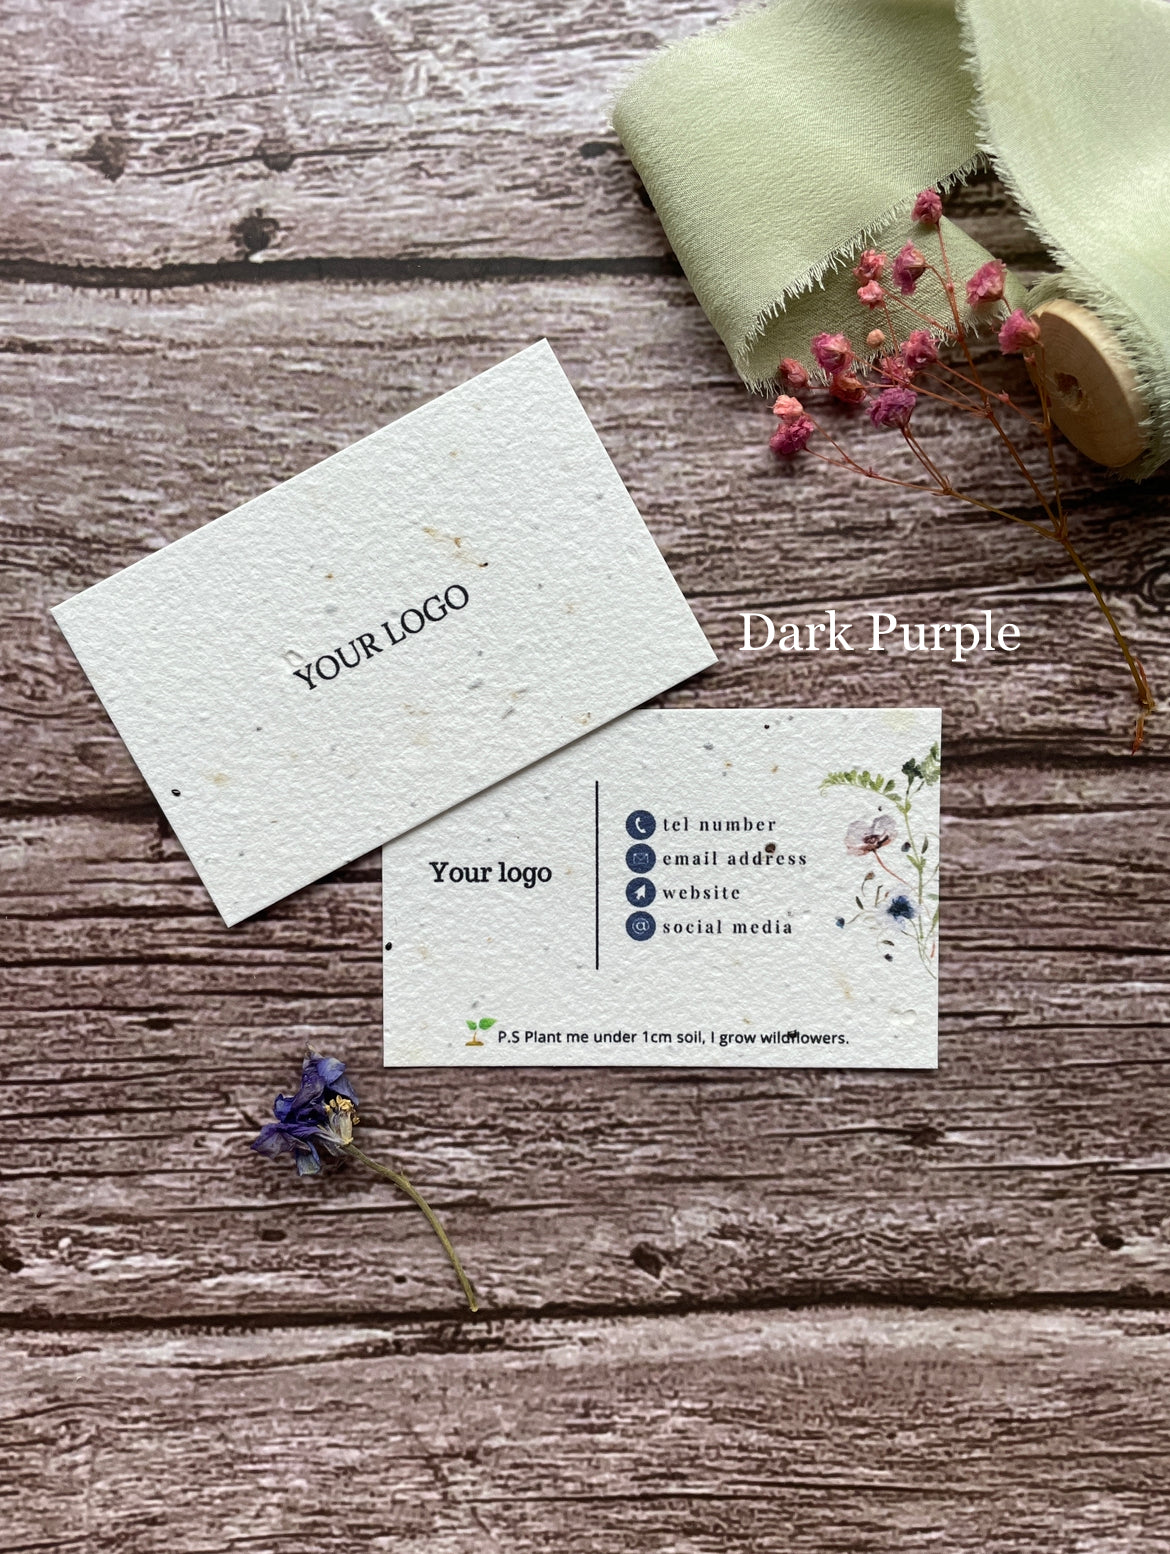 Pre-Designed Plantable Seed Paper Business Cards | Packs of 30 - 300